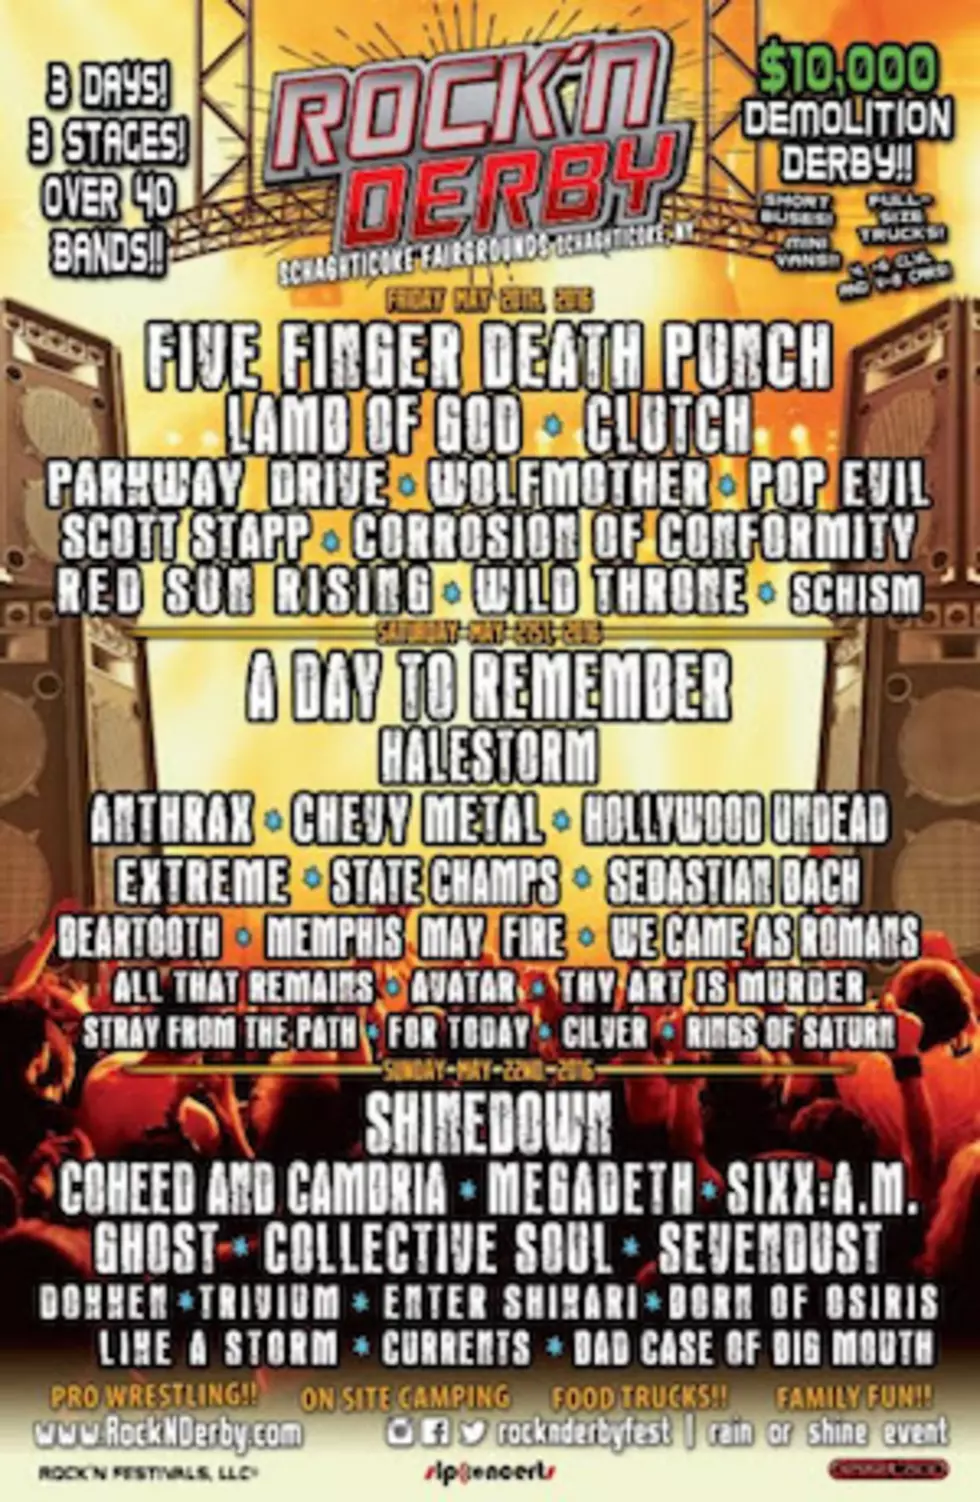 Sebastian Bach, Corrosion of Conformity, Hollywood Undead + More Added to Rock&#8217;N Derby